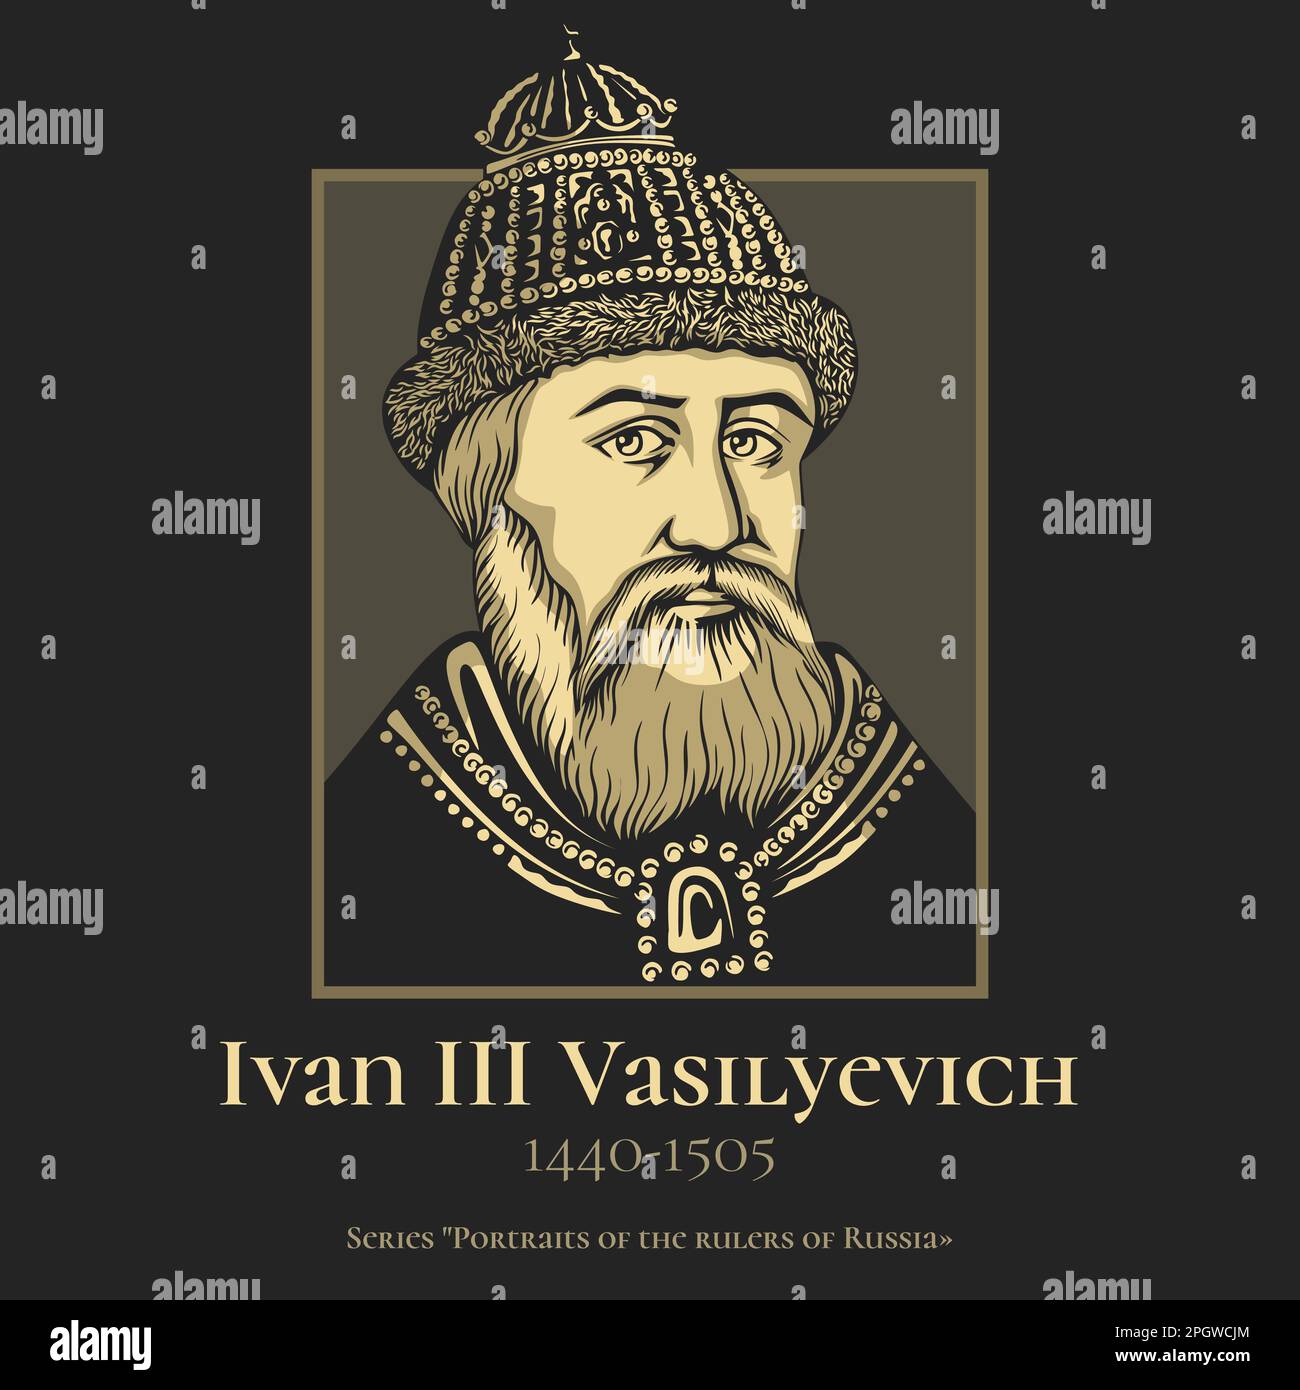 Ivan III Vasilyevich (1440-1505), also known as Ivan the Great, was the Grand Prince of Moscow and the Sovereign of all Rus. Stock Vector